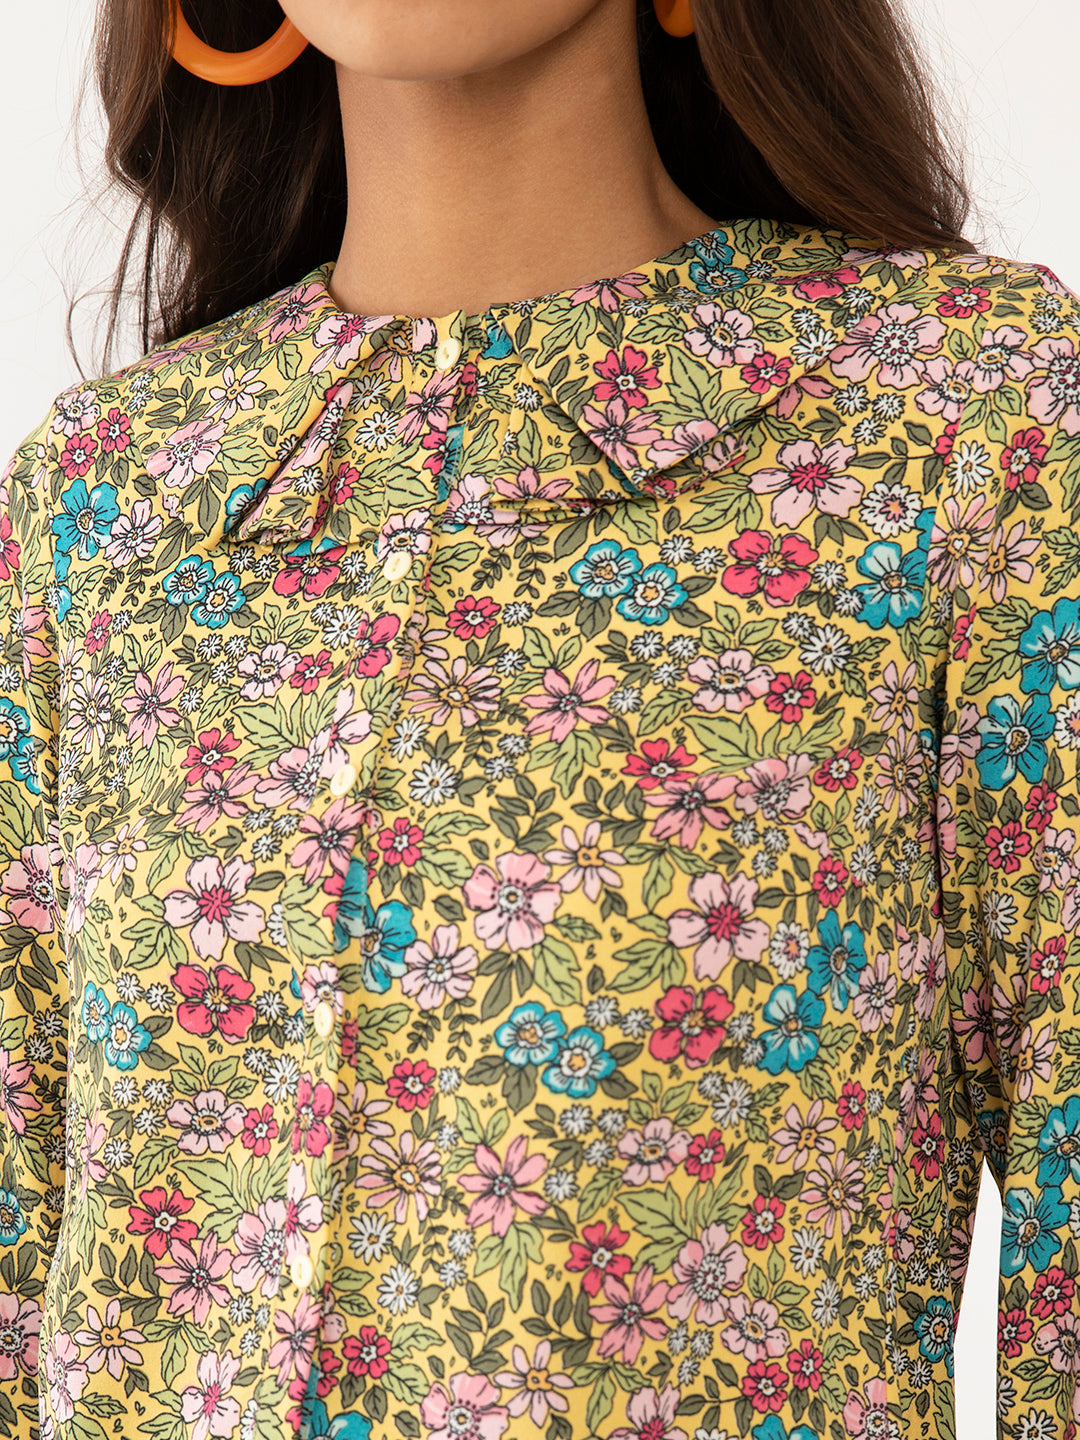 Multi Colored Floral Print Top For Women